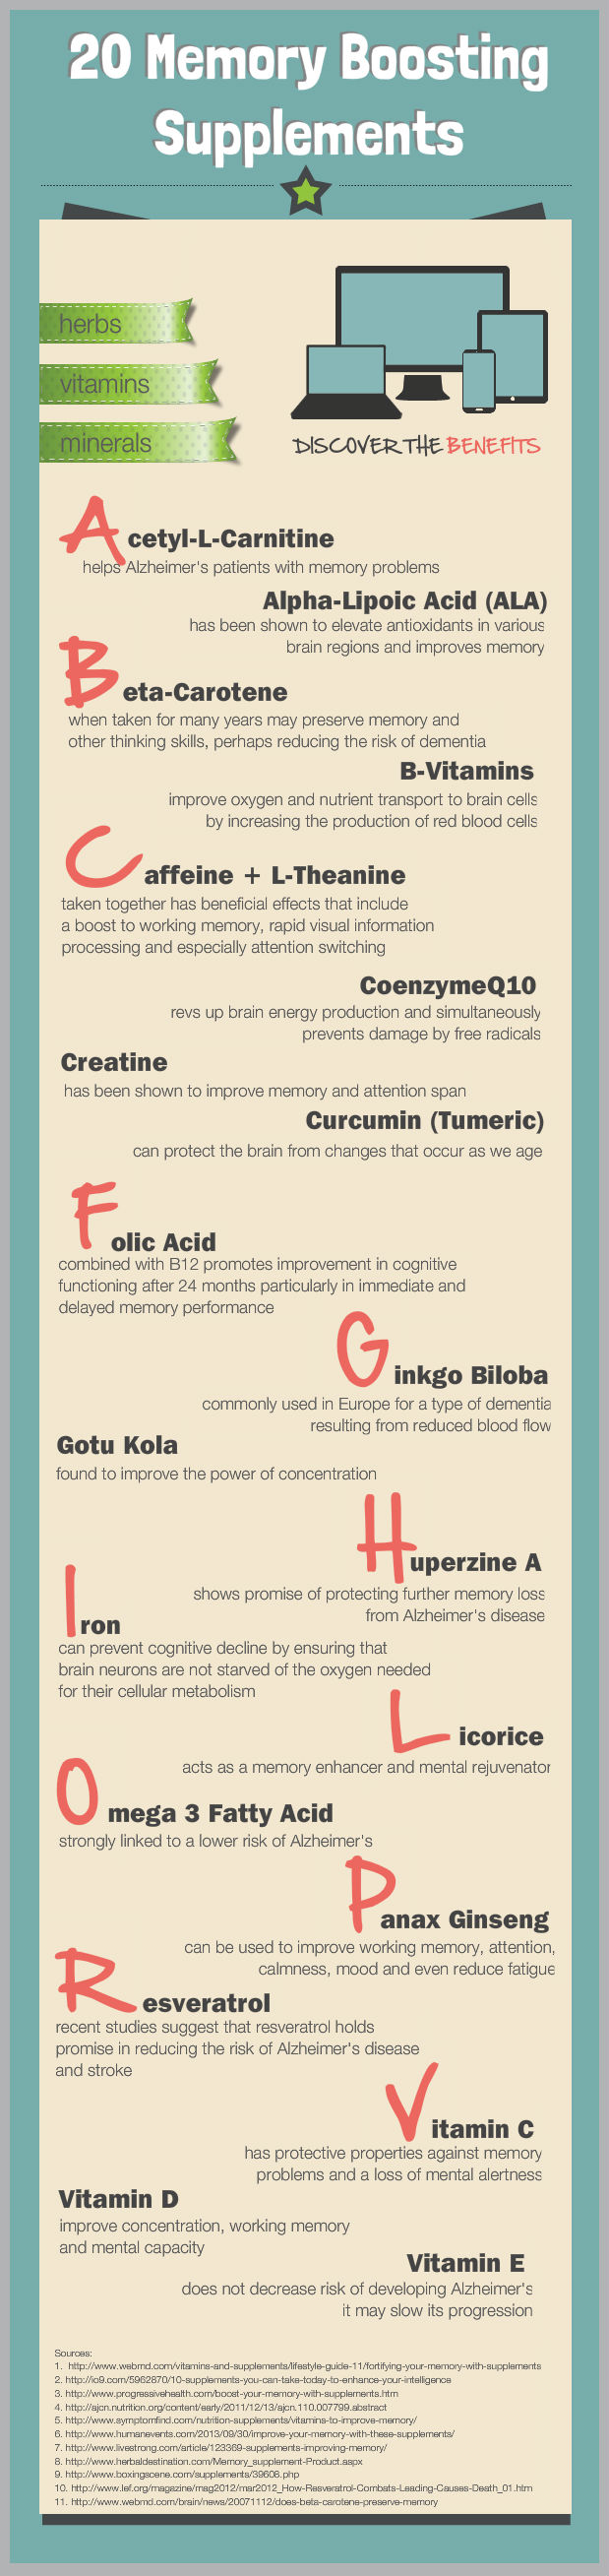 20 Memory Boosting Supplements Infographic_5